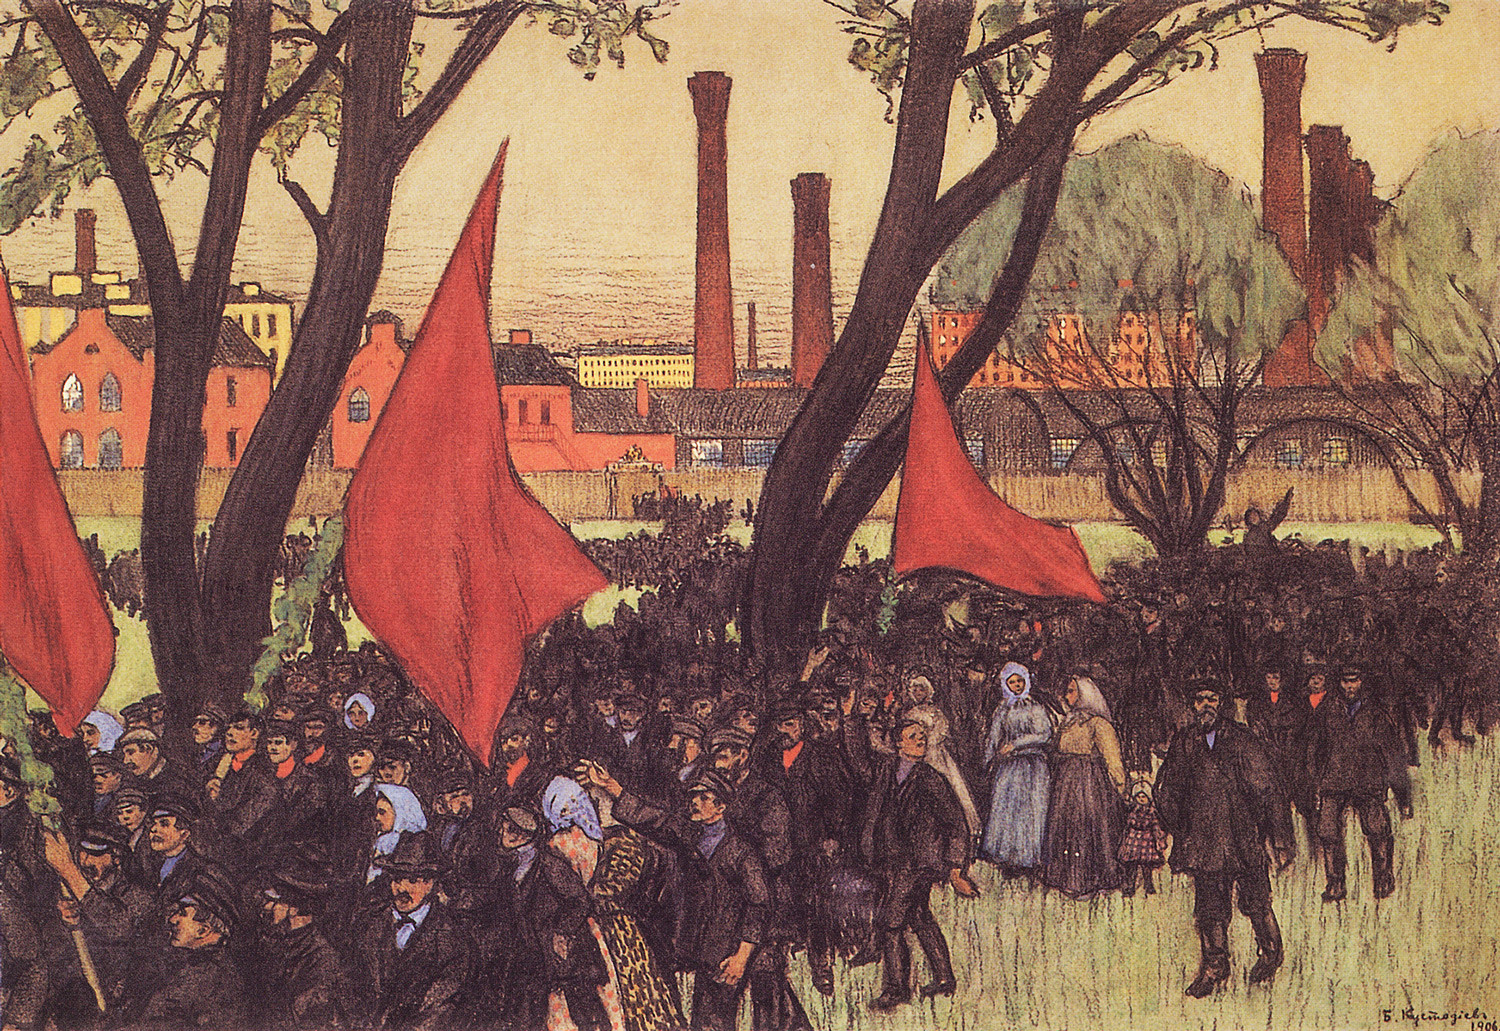 The May 1st demonstration of 1906, portrayed by a Russian artist Boris Kustodiev.